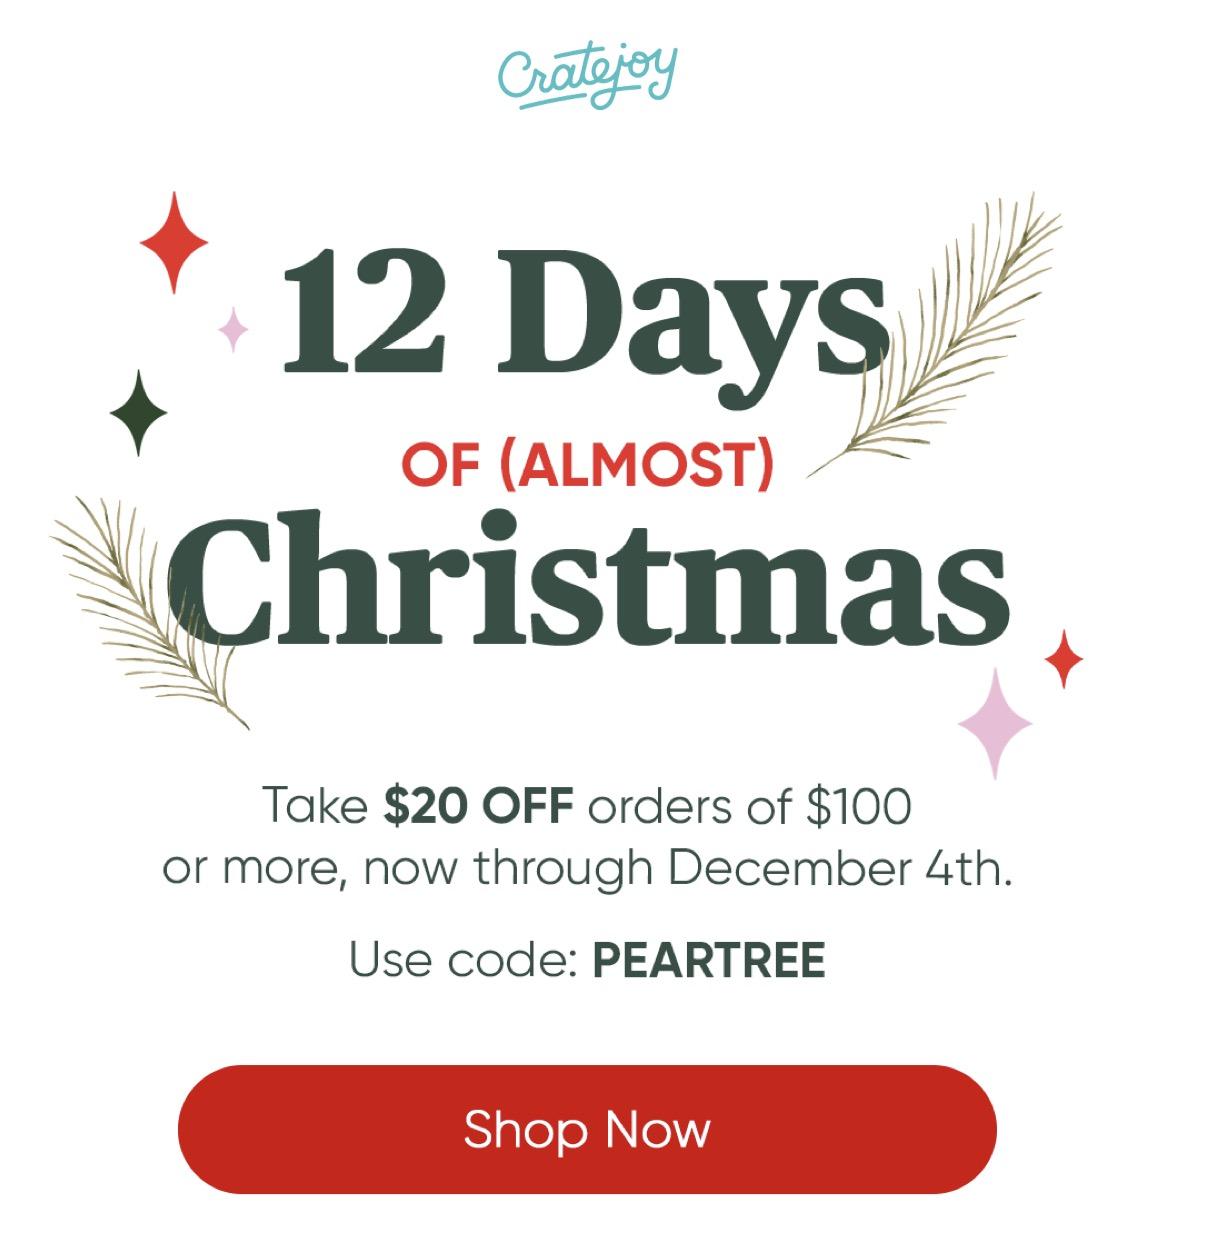 CrateJoy 12 Days of Christmas Sale – Save $20 off $100